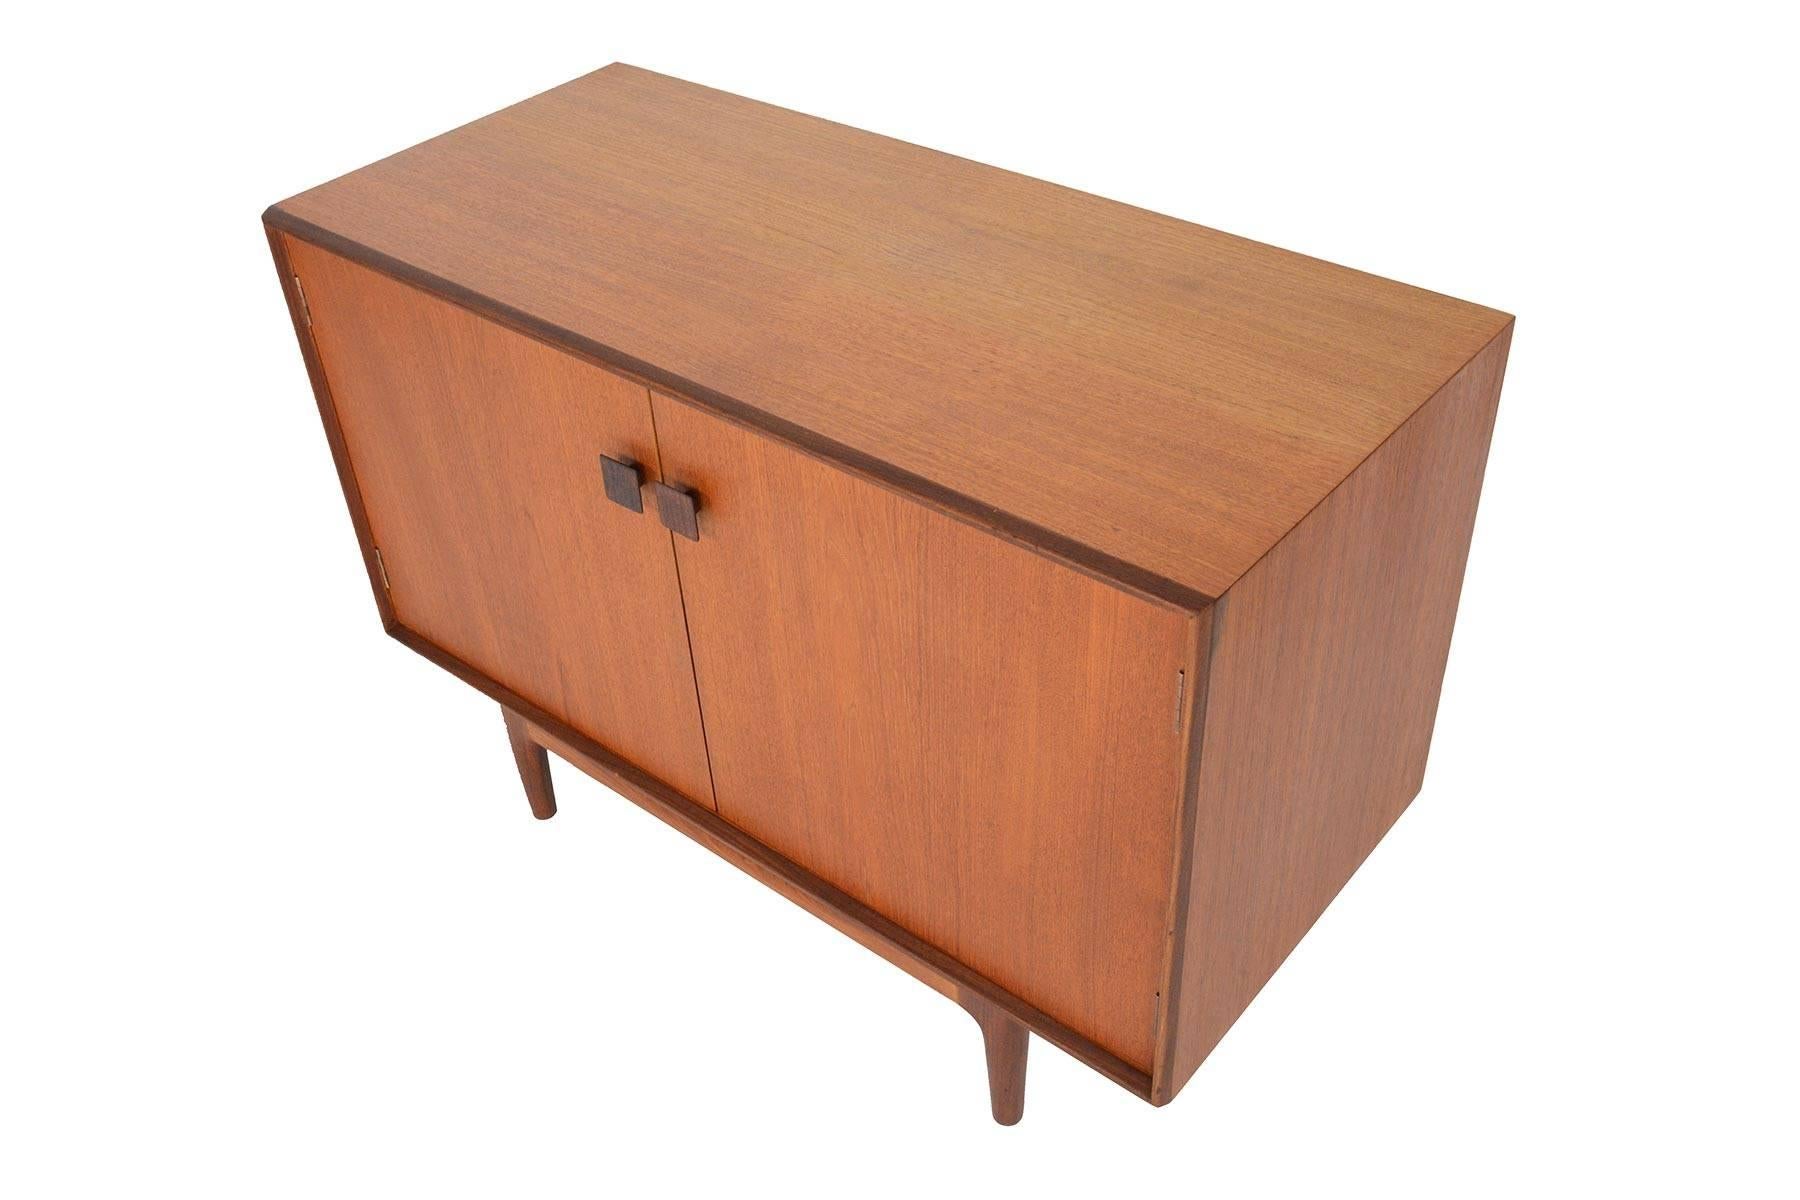 20th Century Small Refinished Teak Credenza by Ib Kofod Larsen for G Plan #3